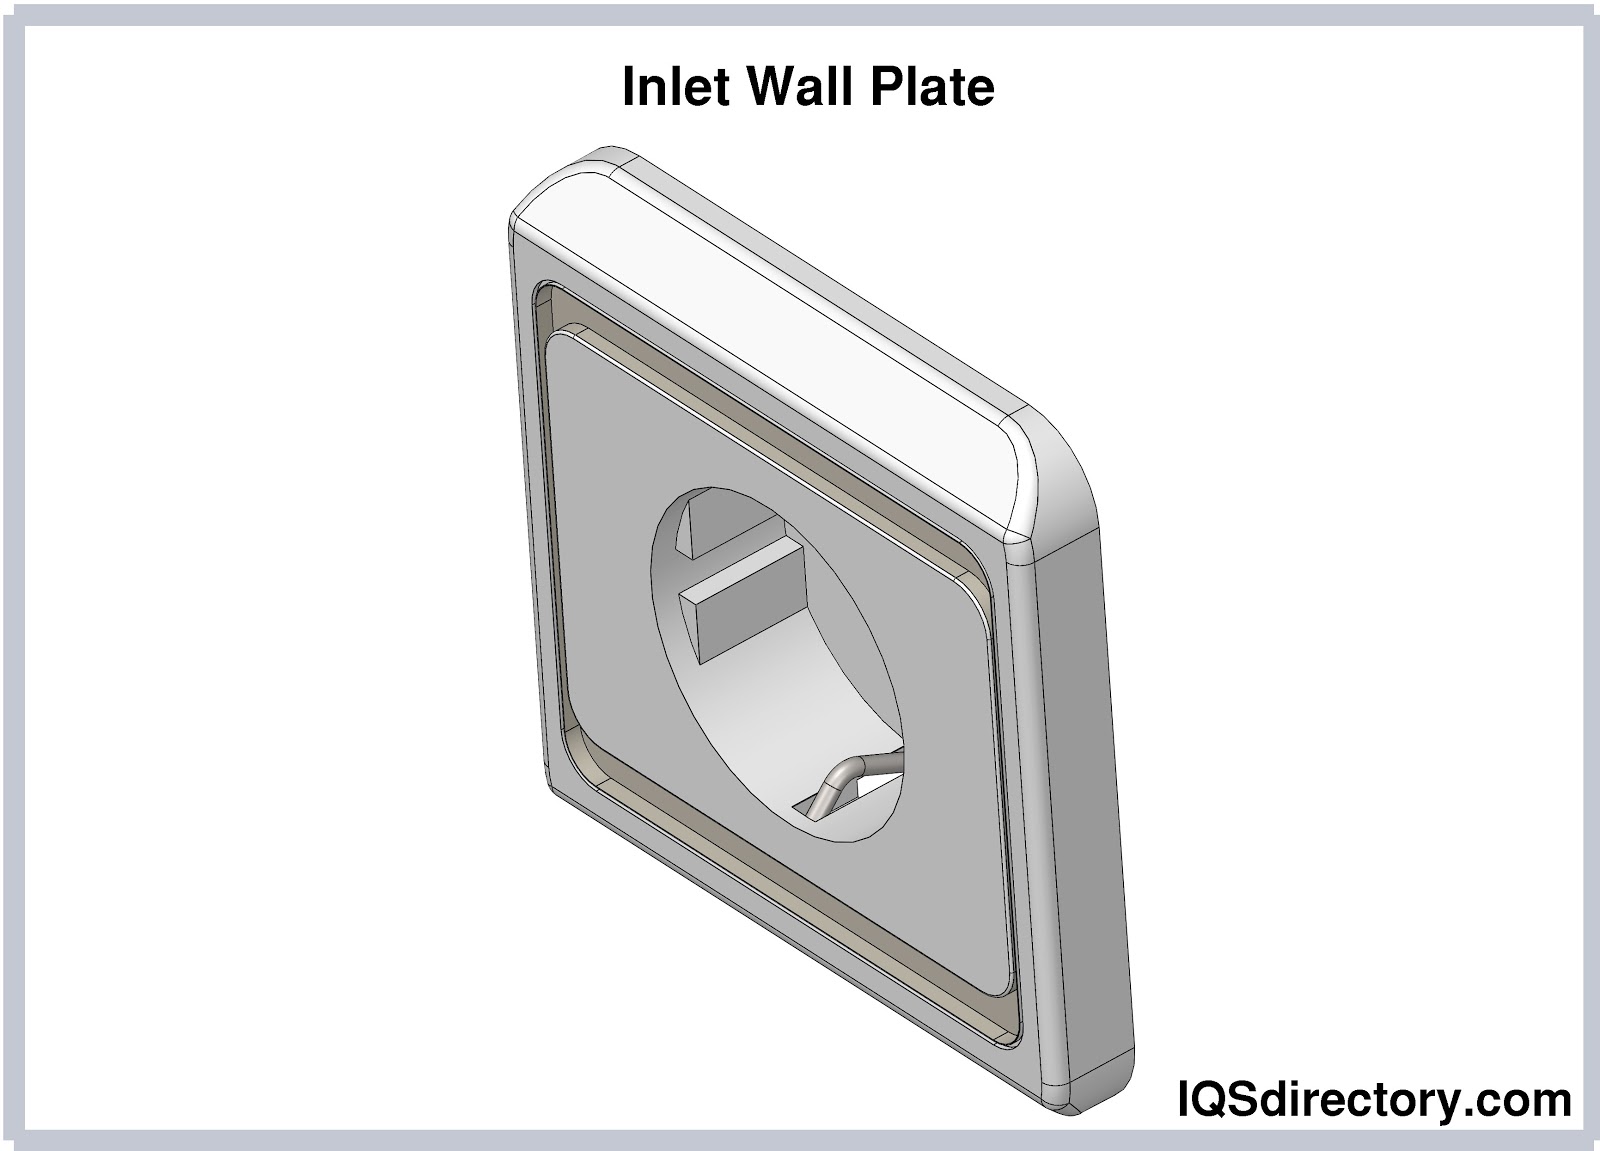 Inlet Wall Plate